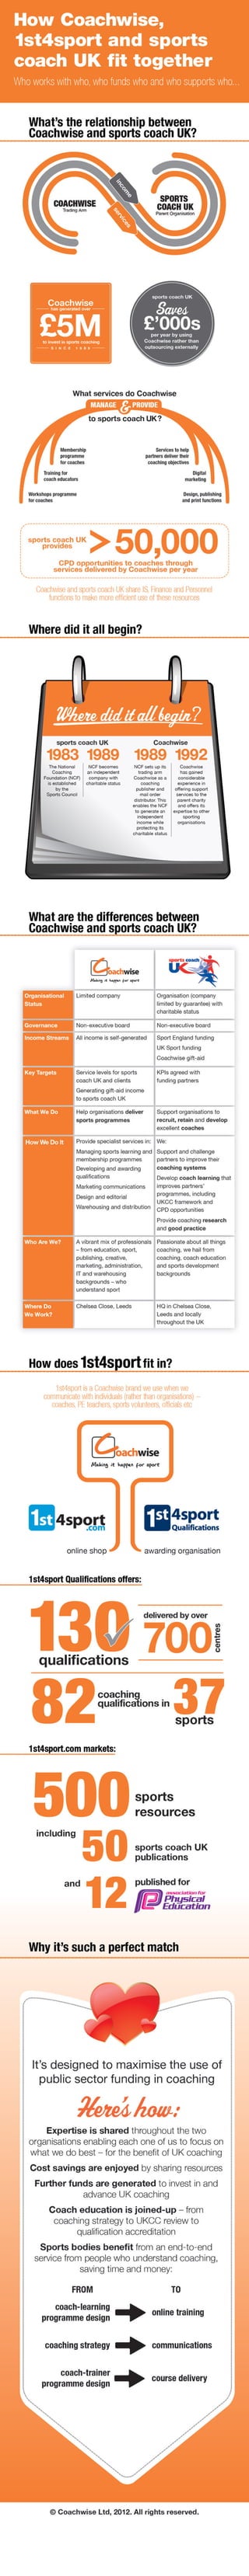 Coachwise and sports coach UK - The Perfect Match Infographic